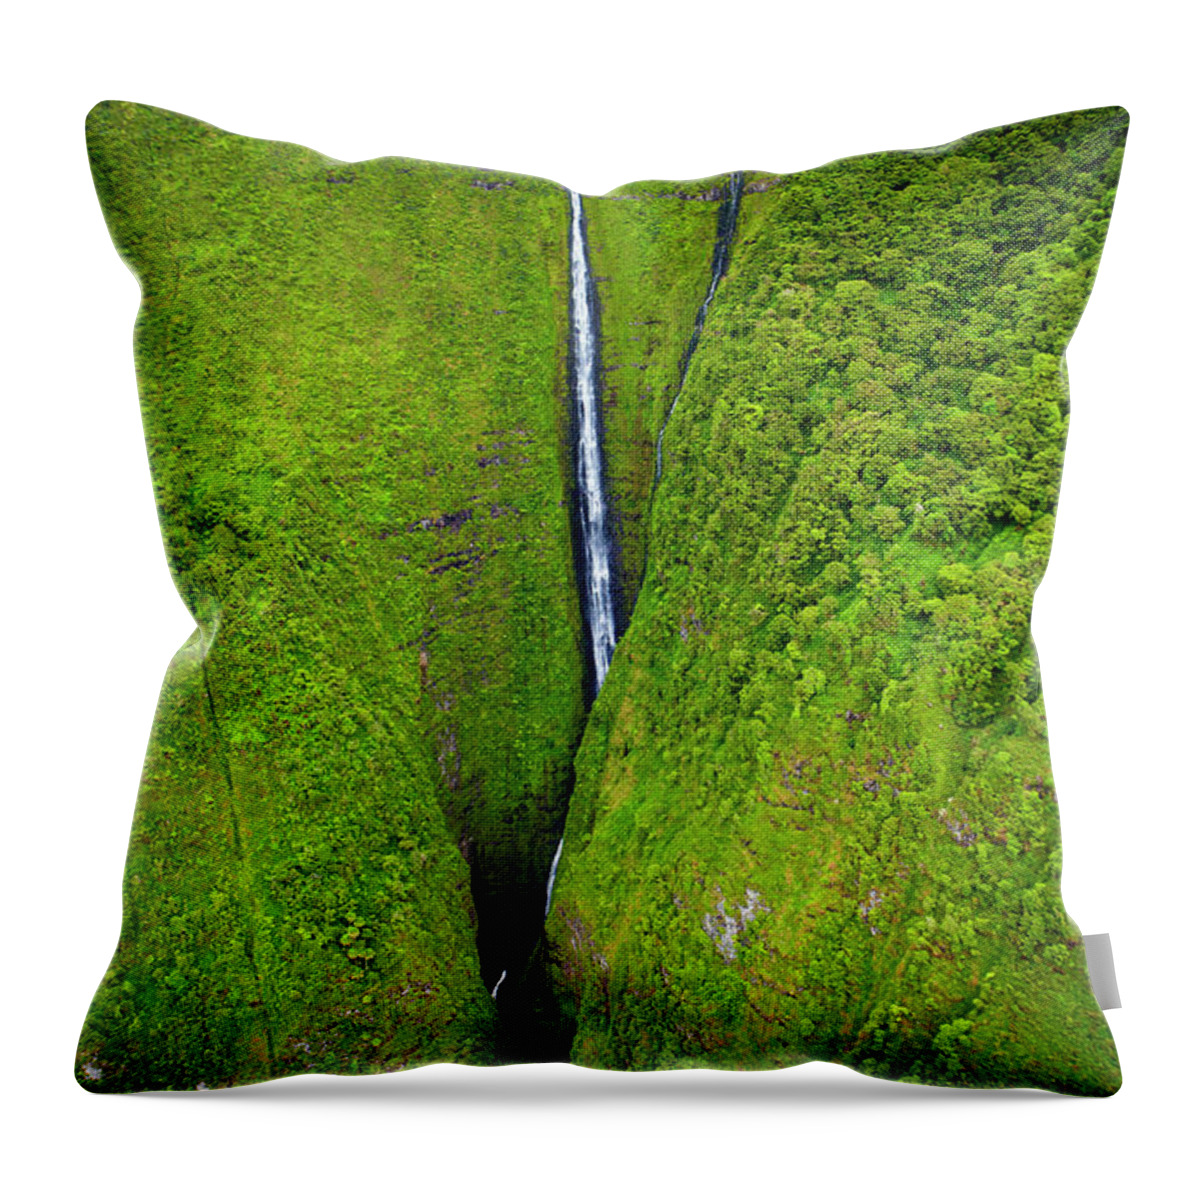 Scenics Throw Pillow featuring the photograph Waterfall On Molokai North Shore by Allan Baxter